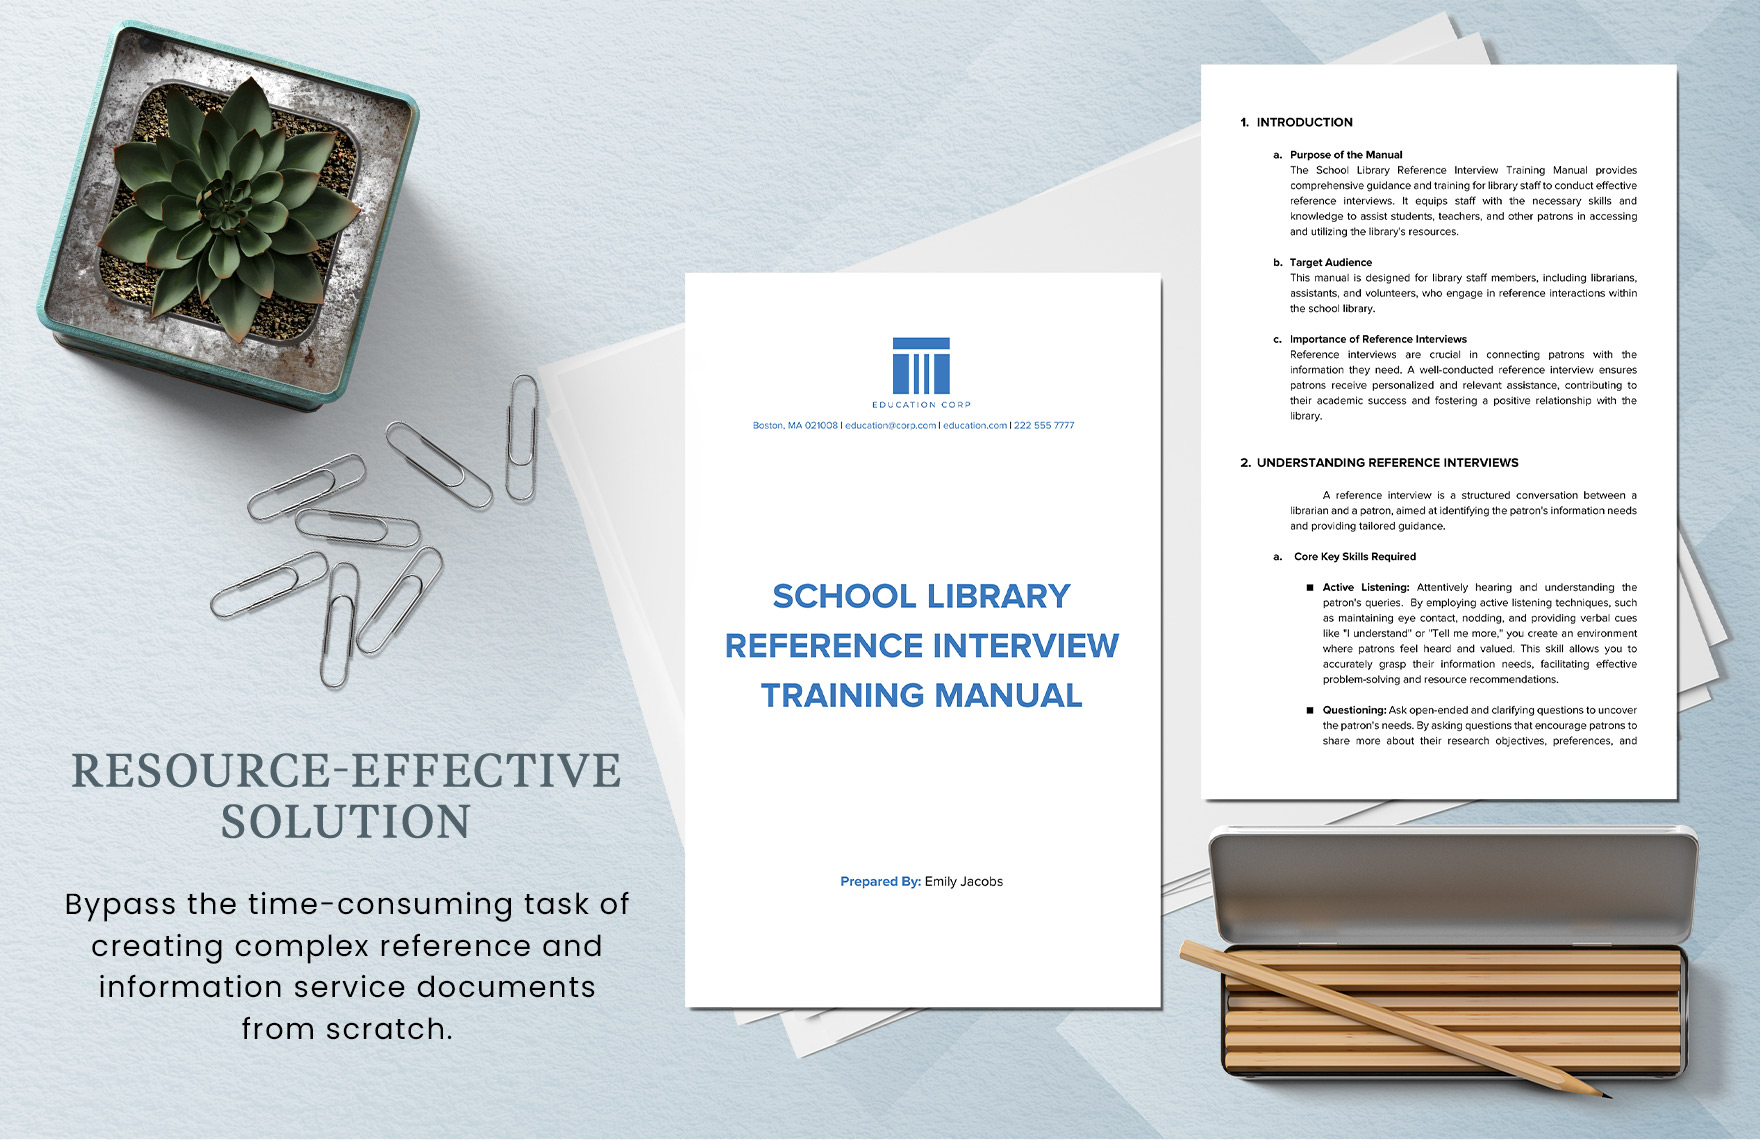 School Library Reference Interview Training Manual Template